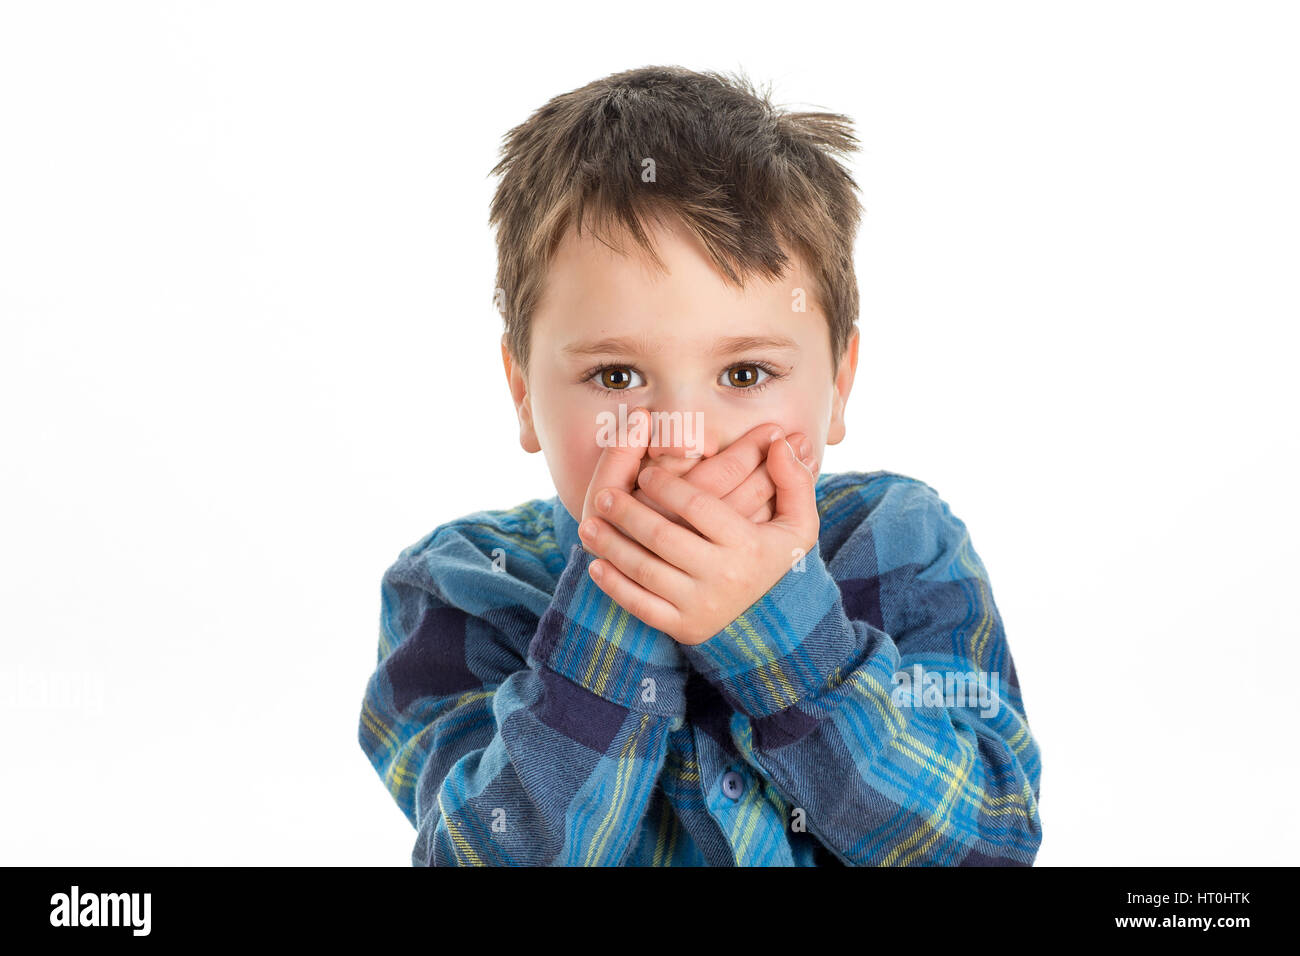 Little boy covering mouth with his hands looking straight ahead. Scared, stubborn or afraid of saying too much. Isolated on a white background. Stock Photo